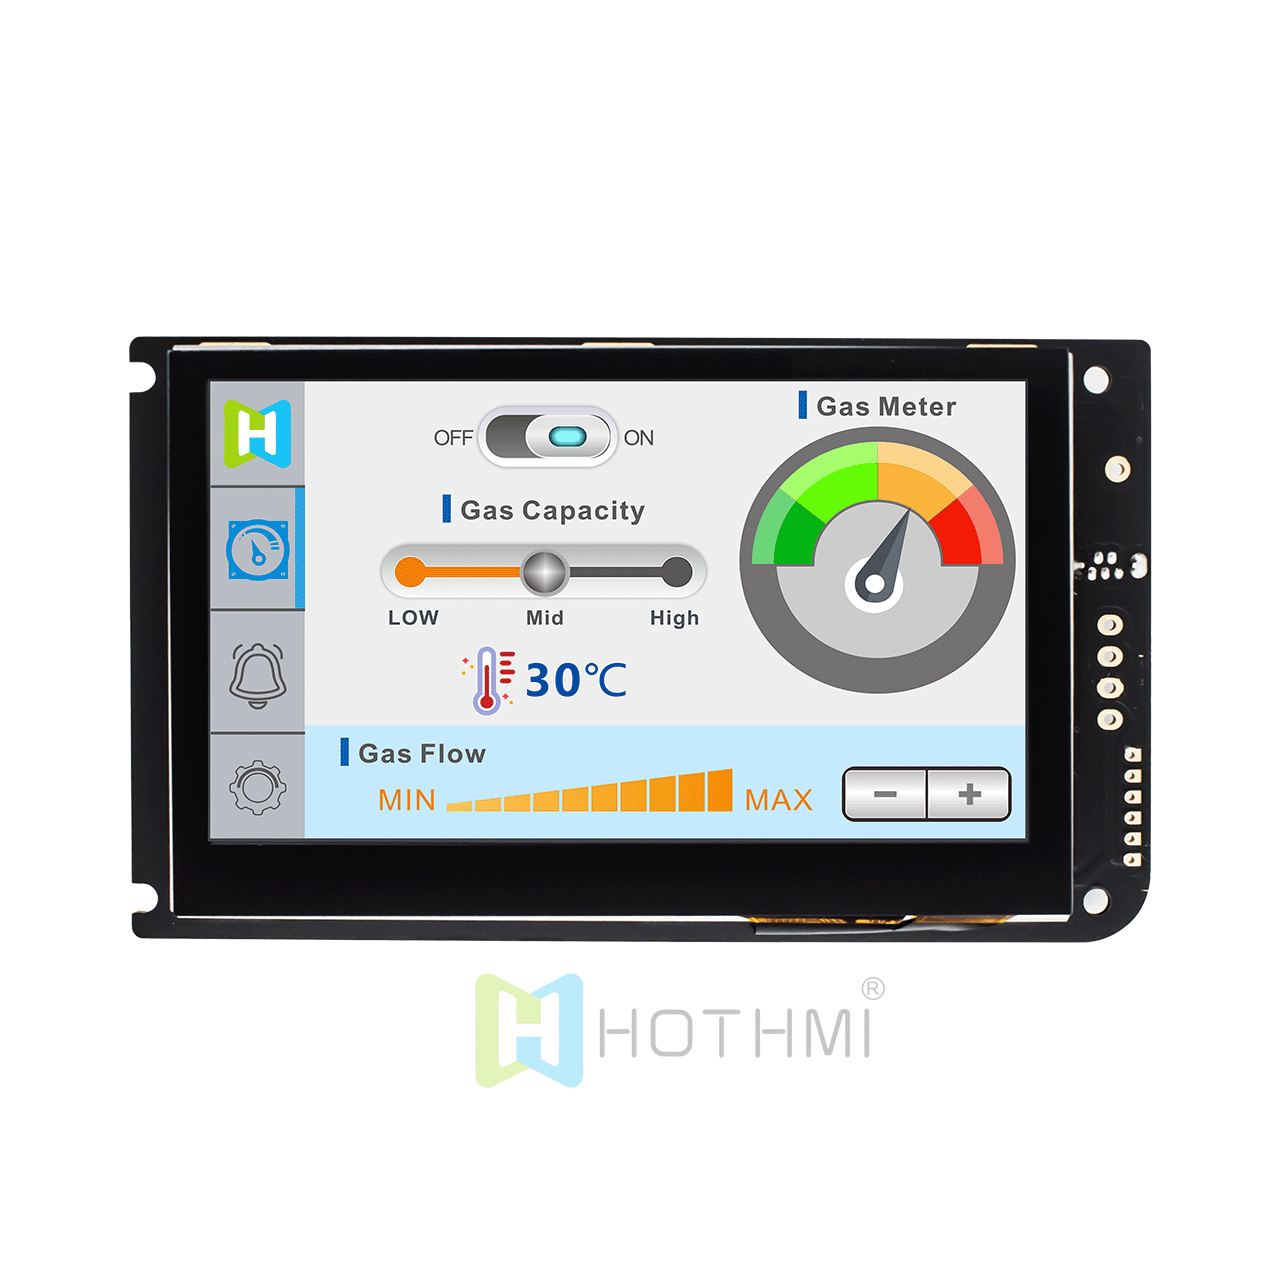 4.3-inch 480x272 dot matrix smart serial screen TFT LCD display module URAT capacitive touch screen HMI IPS sunlight readable compatible with Raspberry Pi